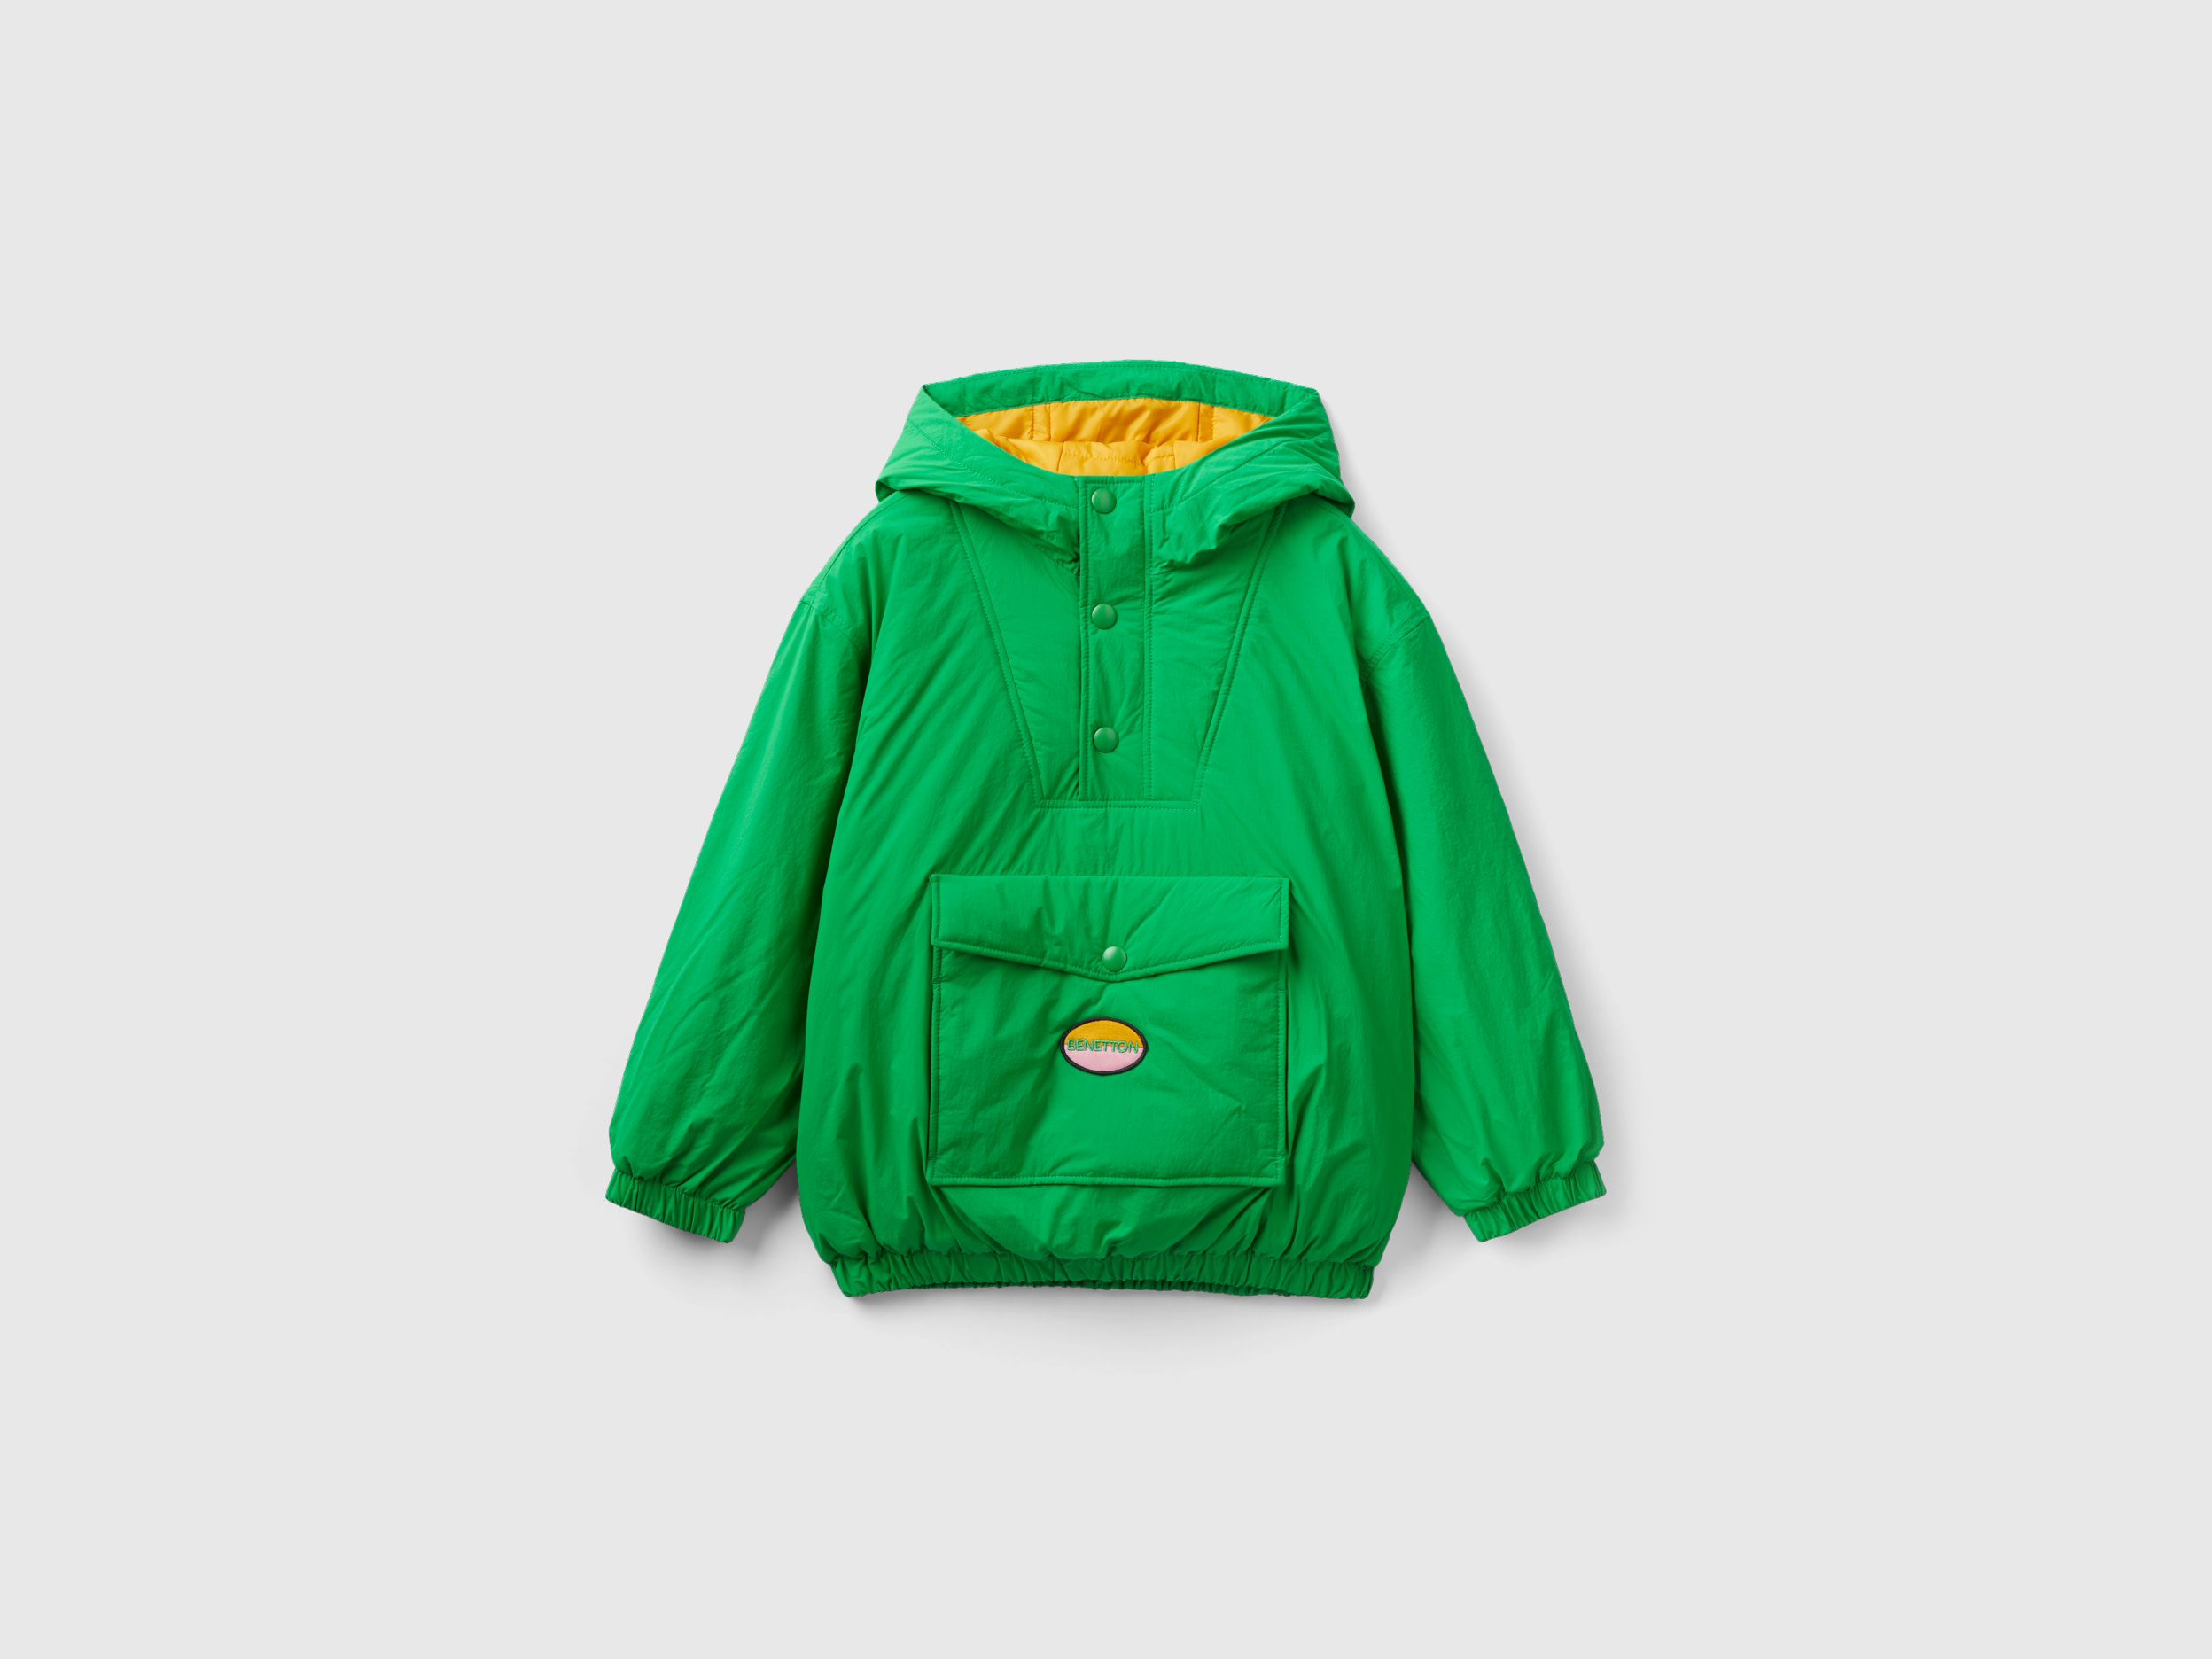 Benetton, Green Jacket With Pocket, size S, Green, Kids